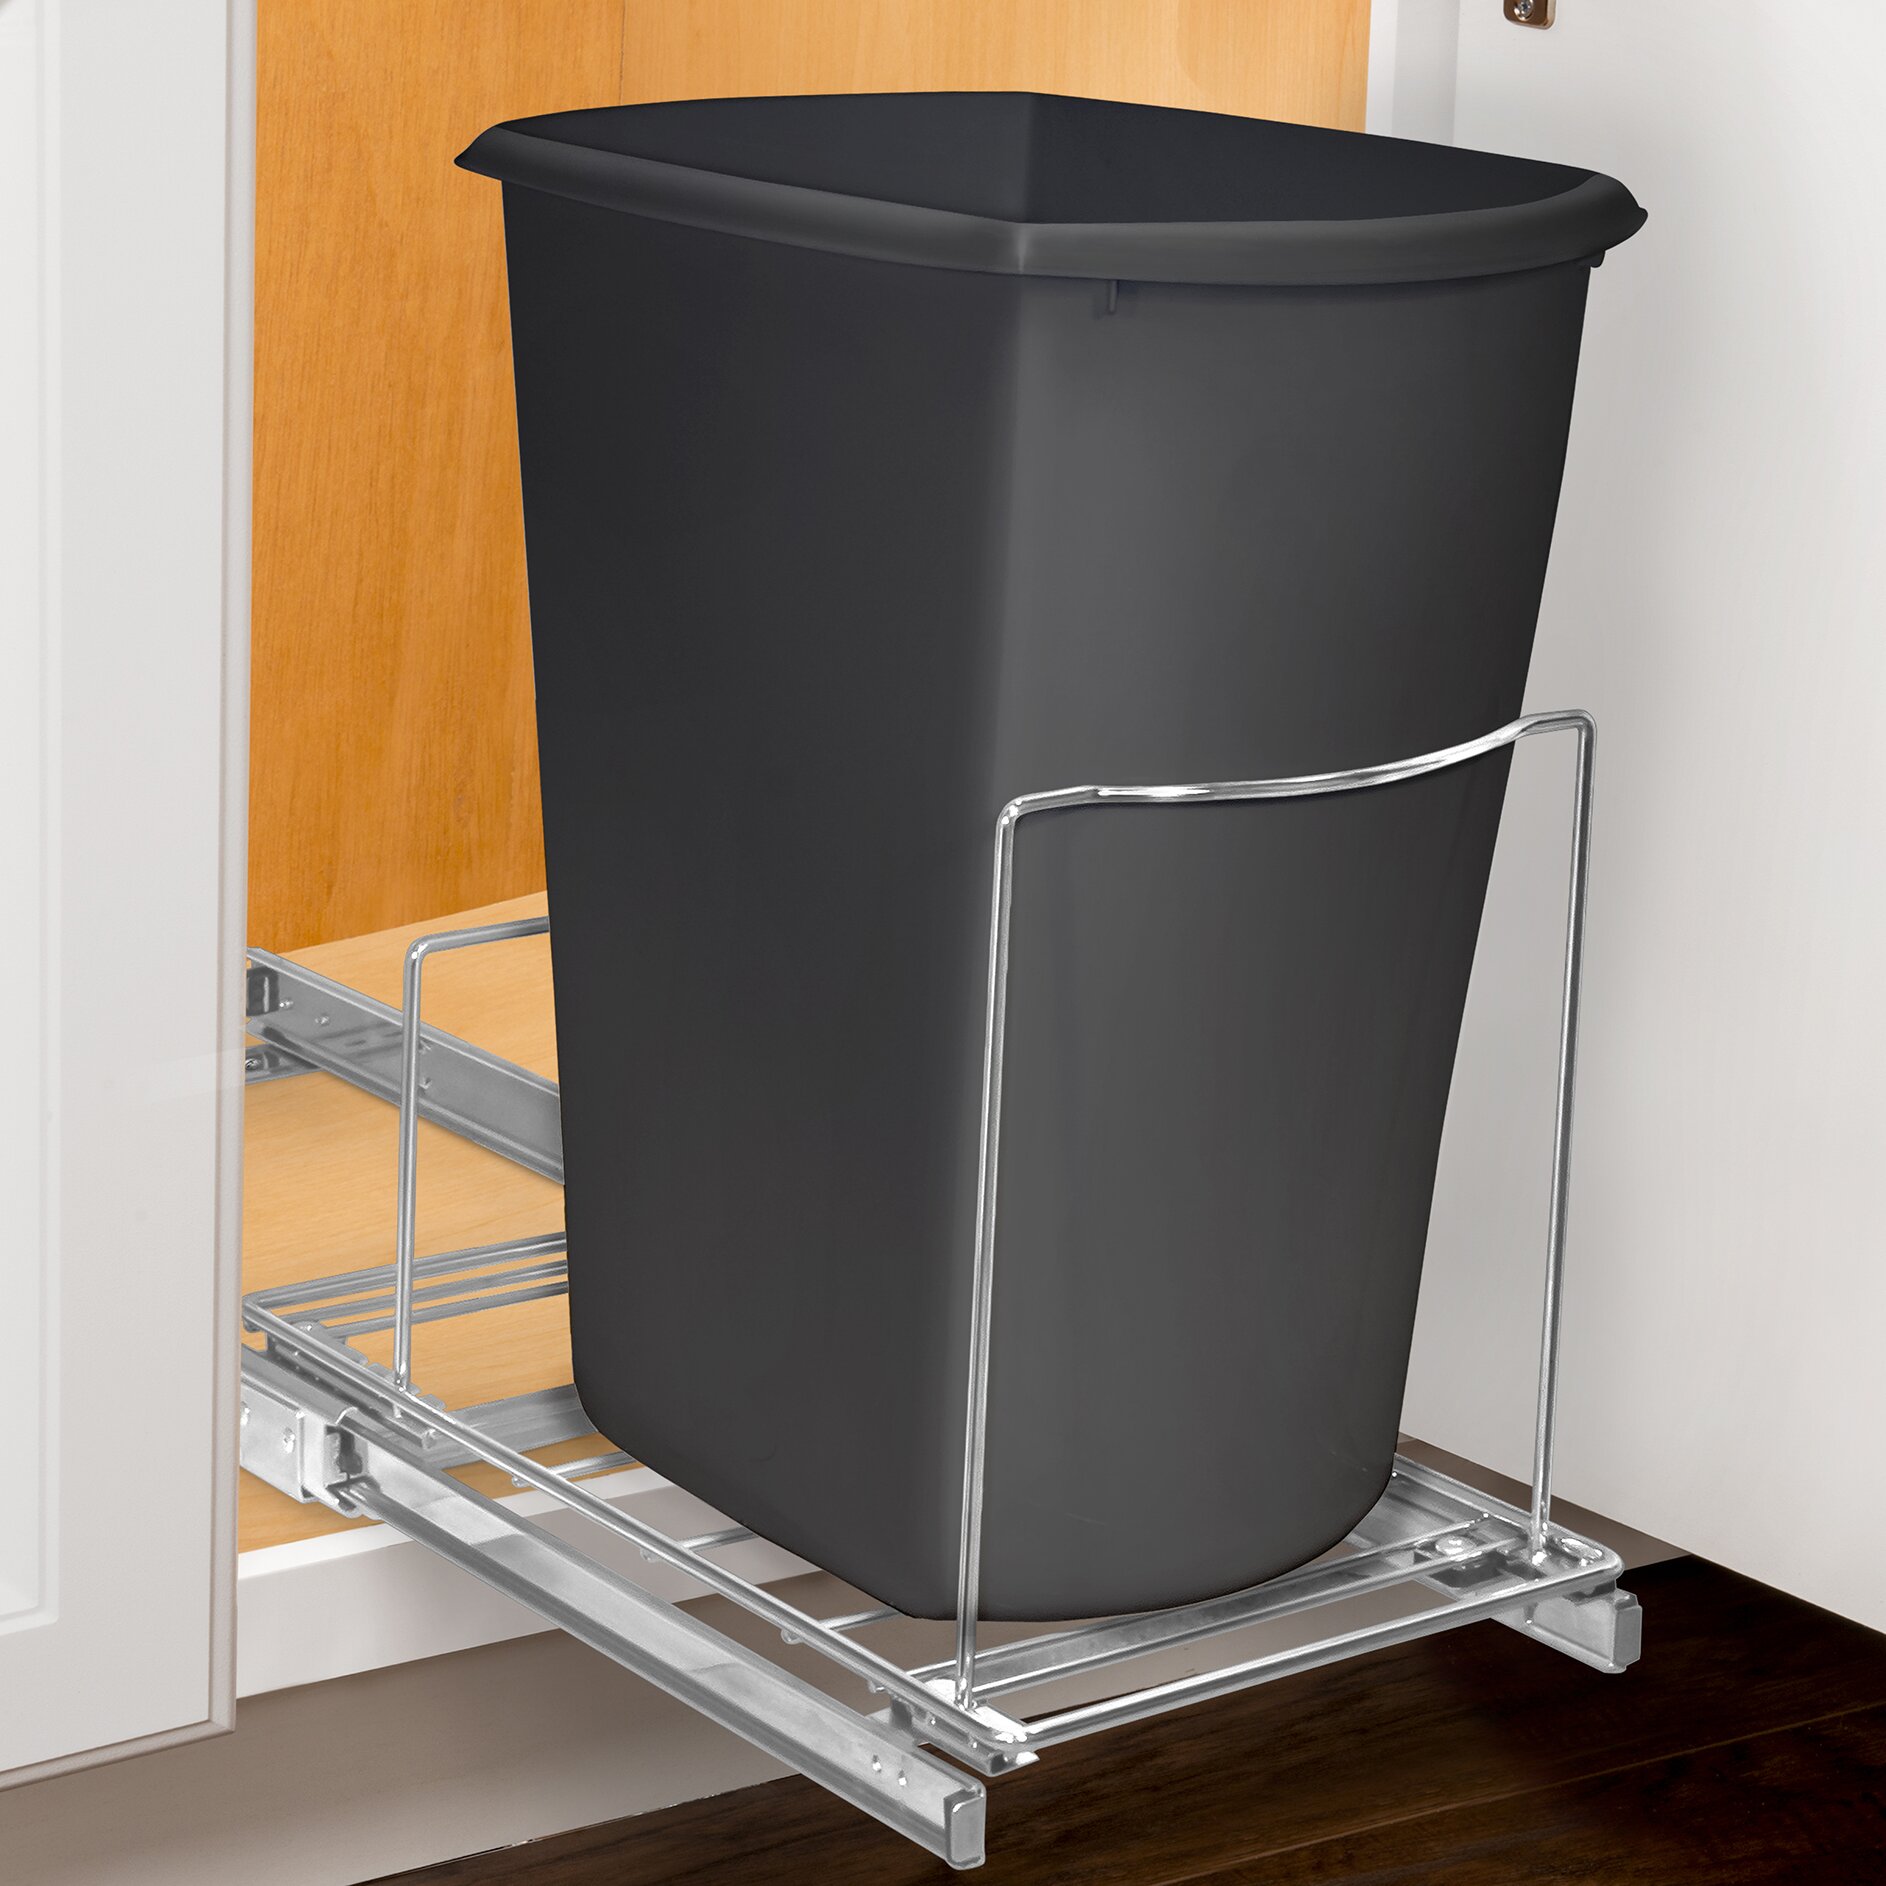 Lynk Roll Out Bin Holder - Pull Out Drawer - Under Cabinet Sliding ...